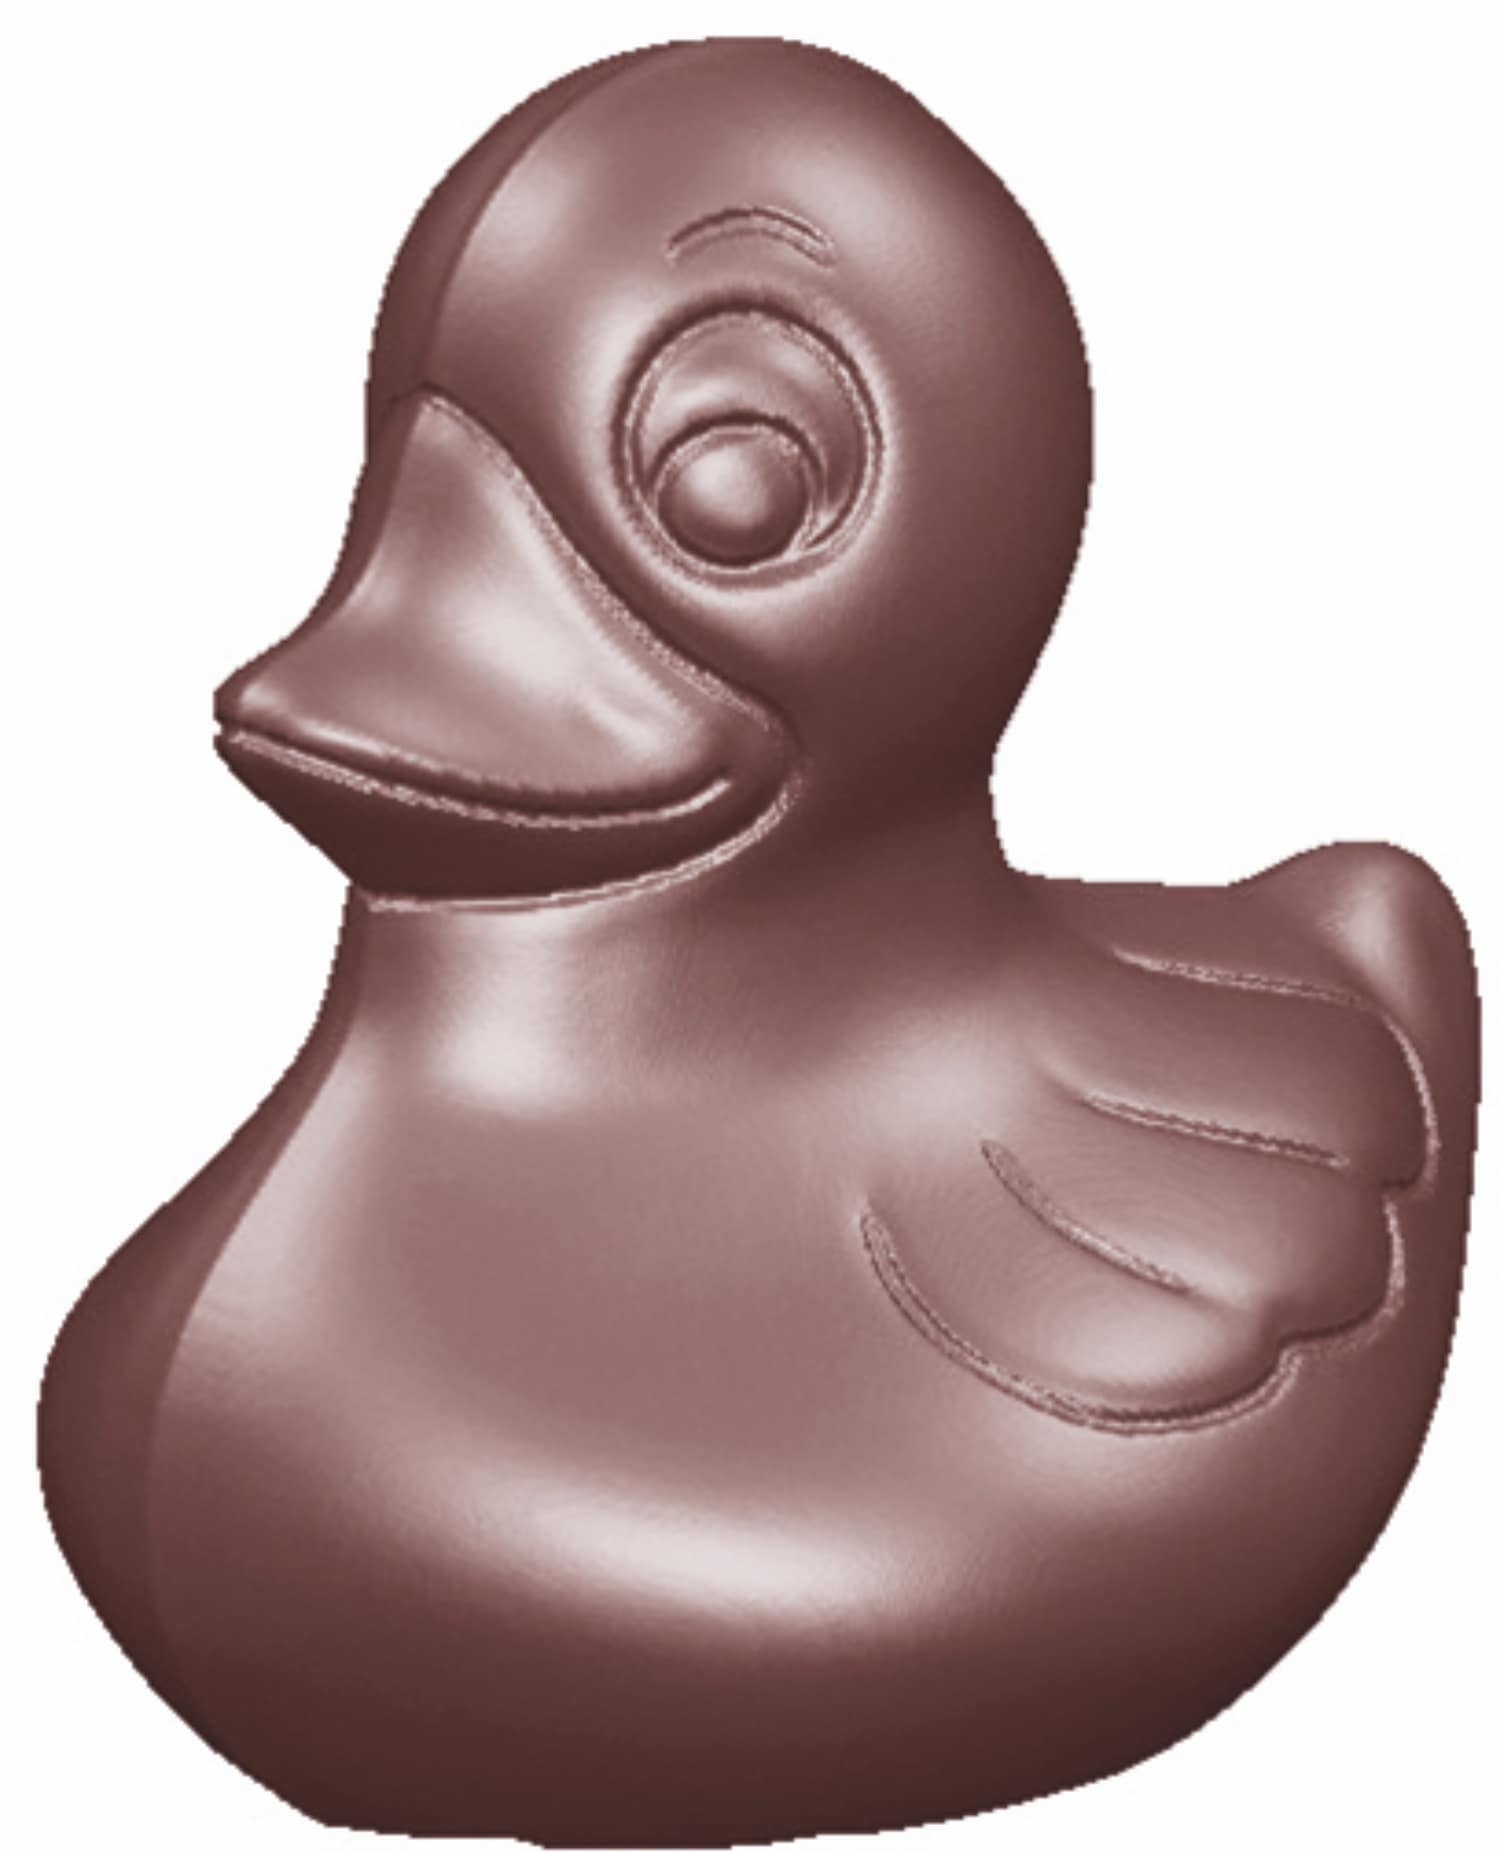 Chocolate mould "duck" 421640 421640